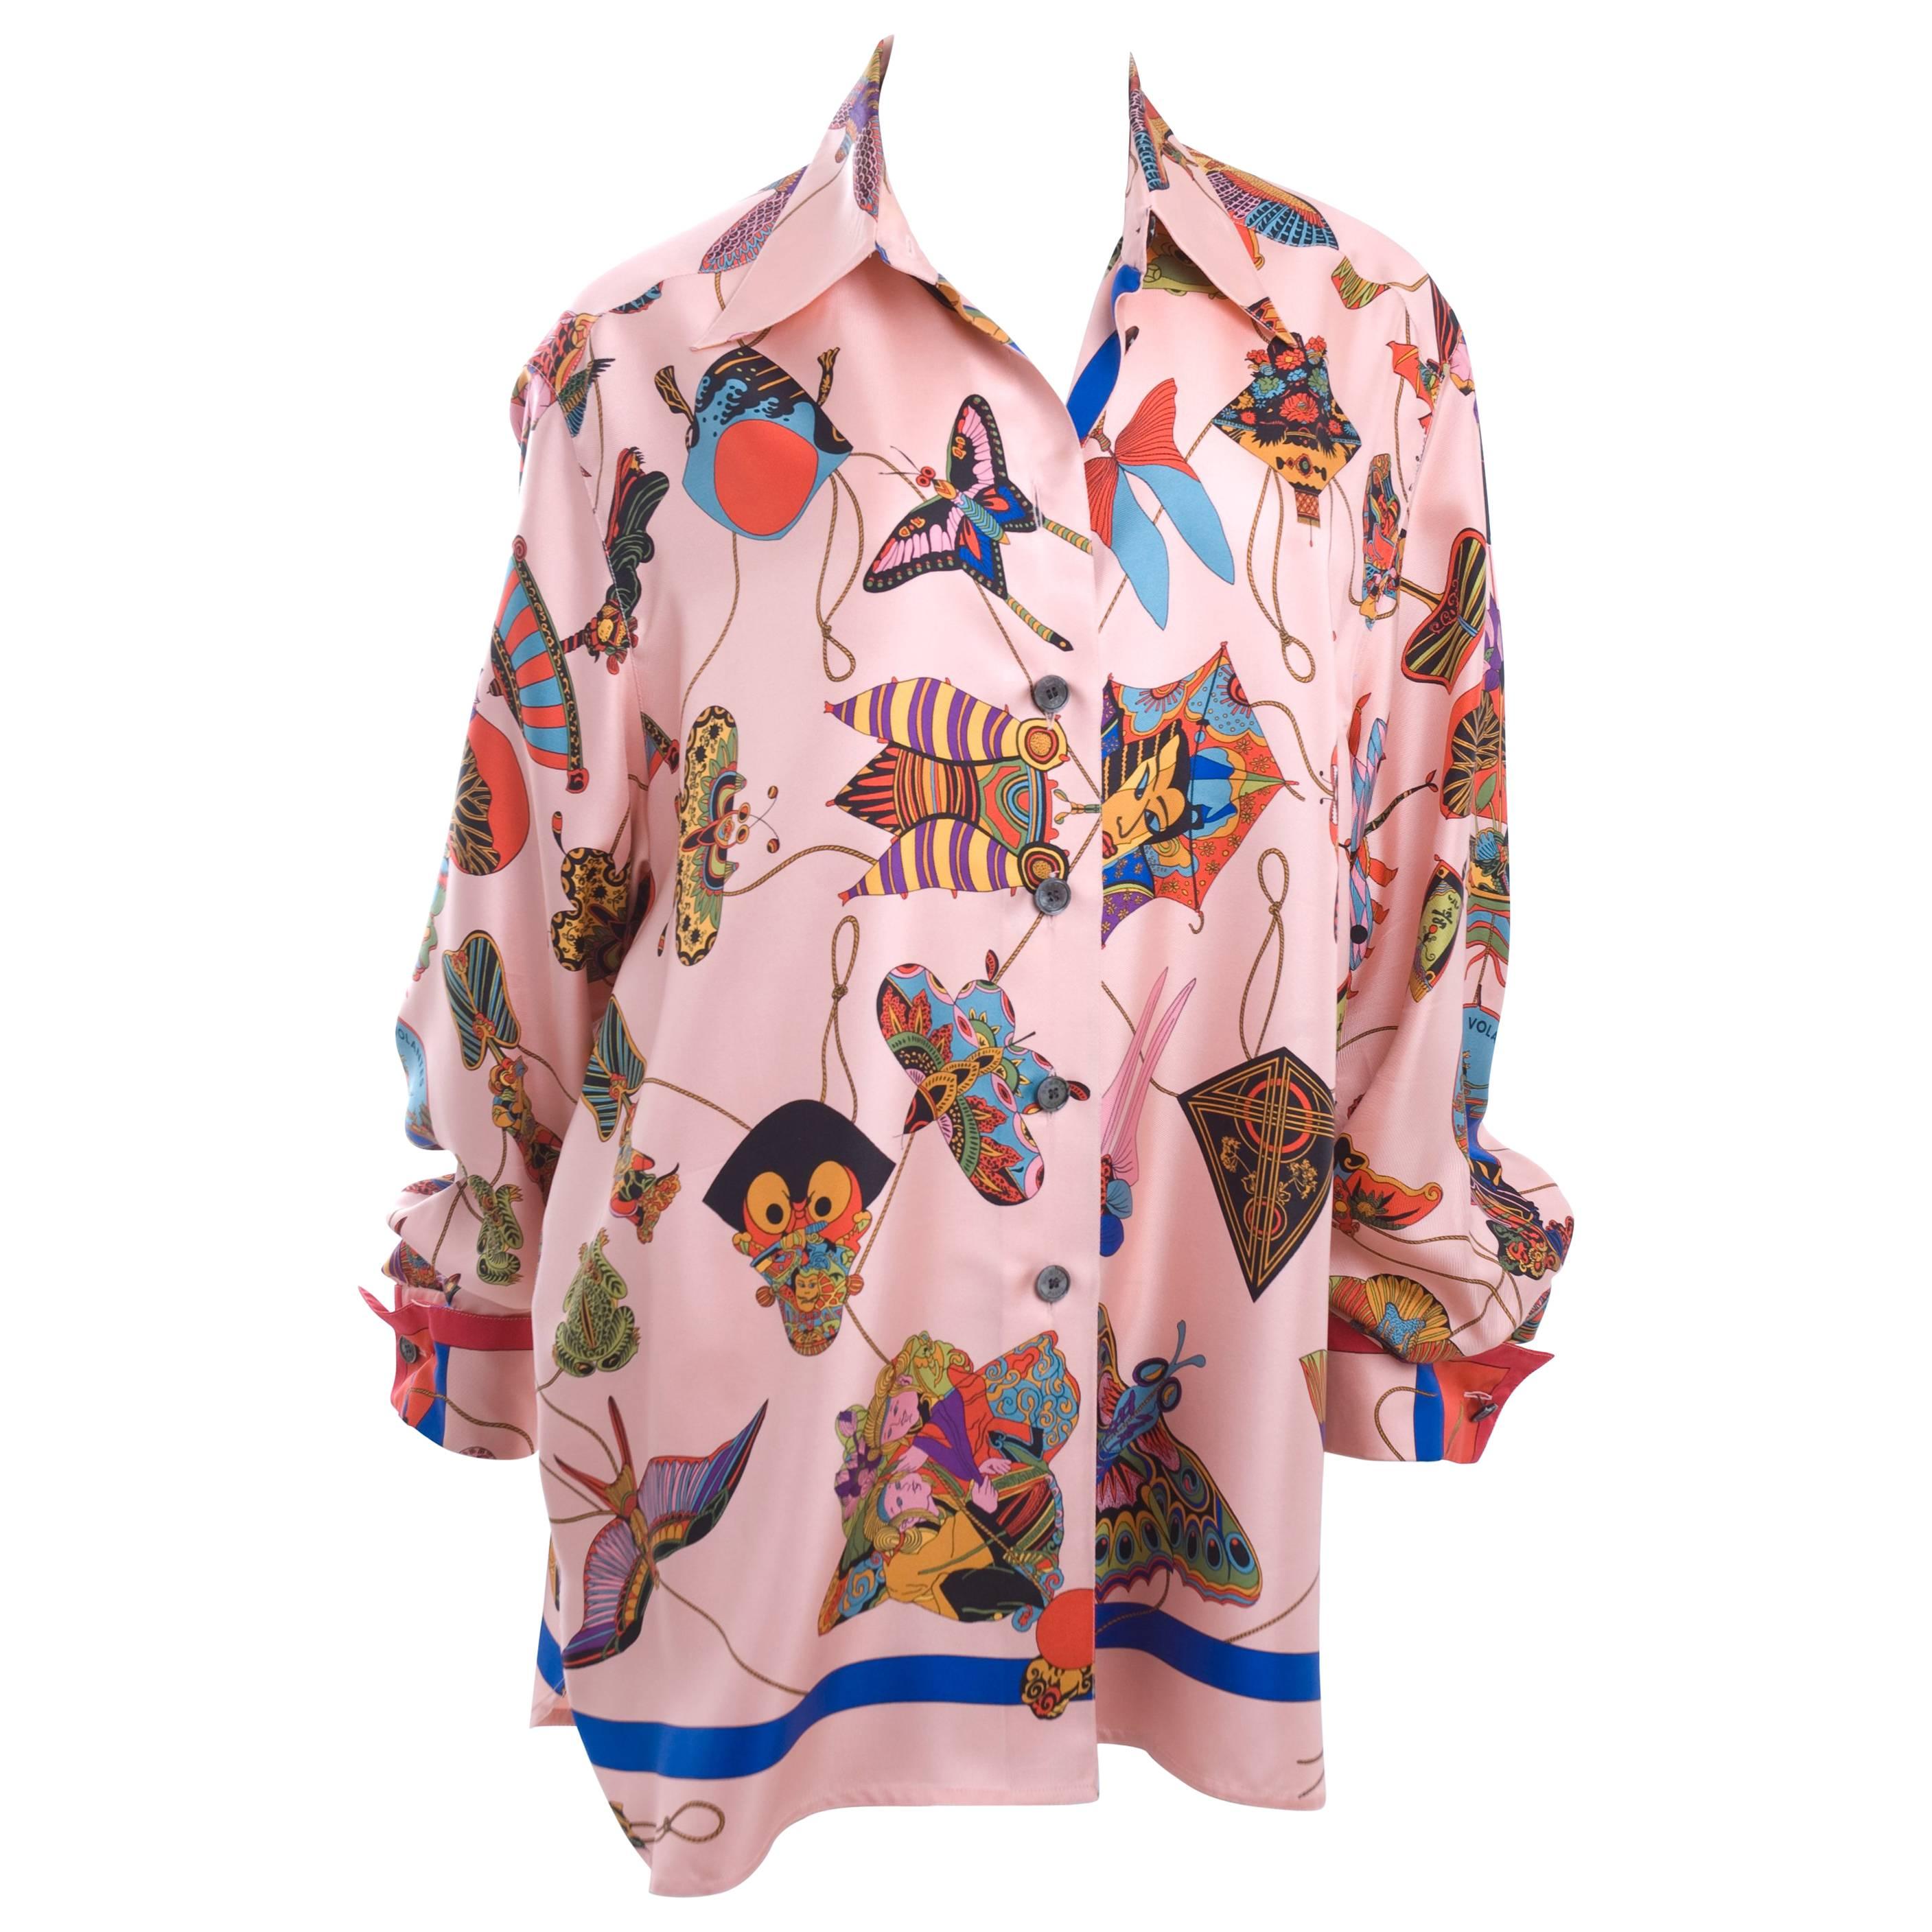 Hermes Pink Silk Blouse " Soies Volantes"or Chinese Kites Print in Amazing Color For Sale